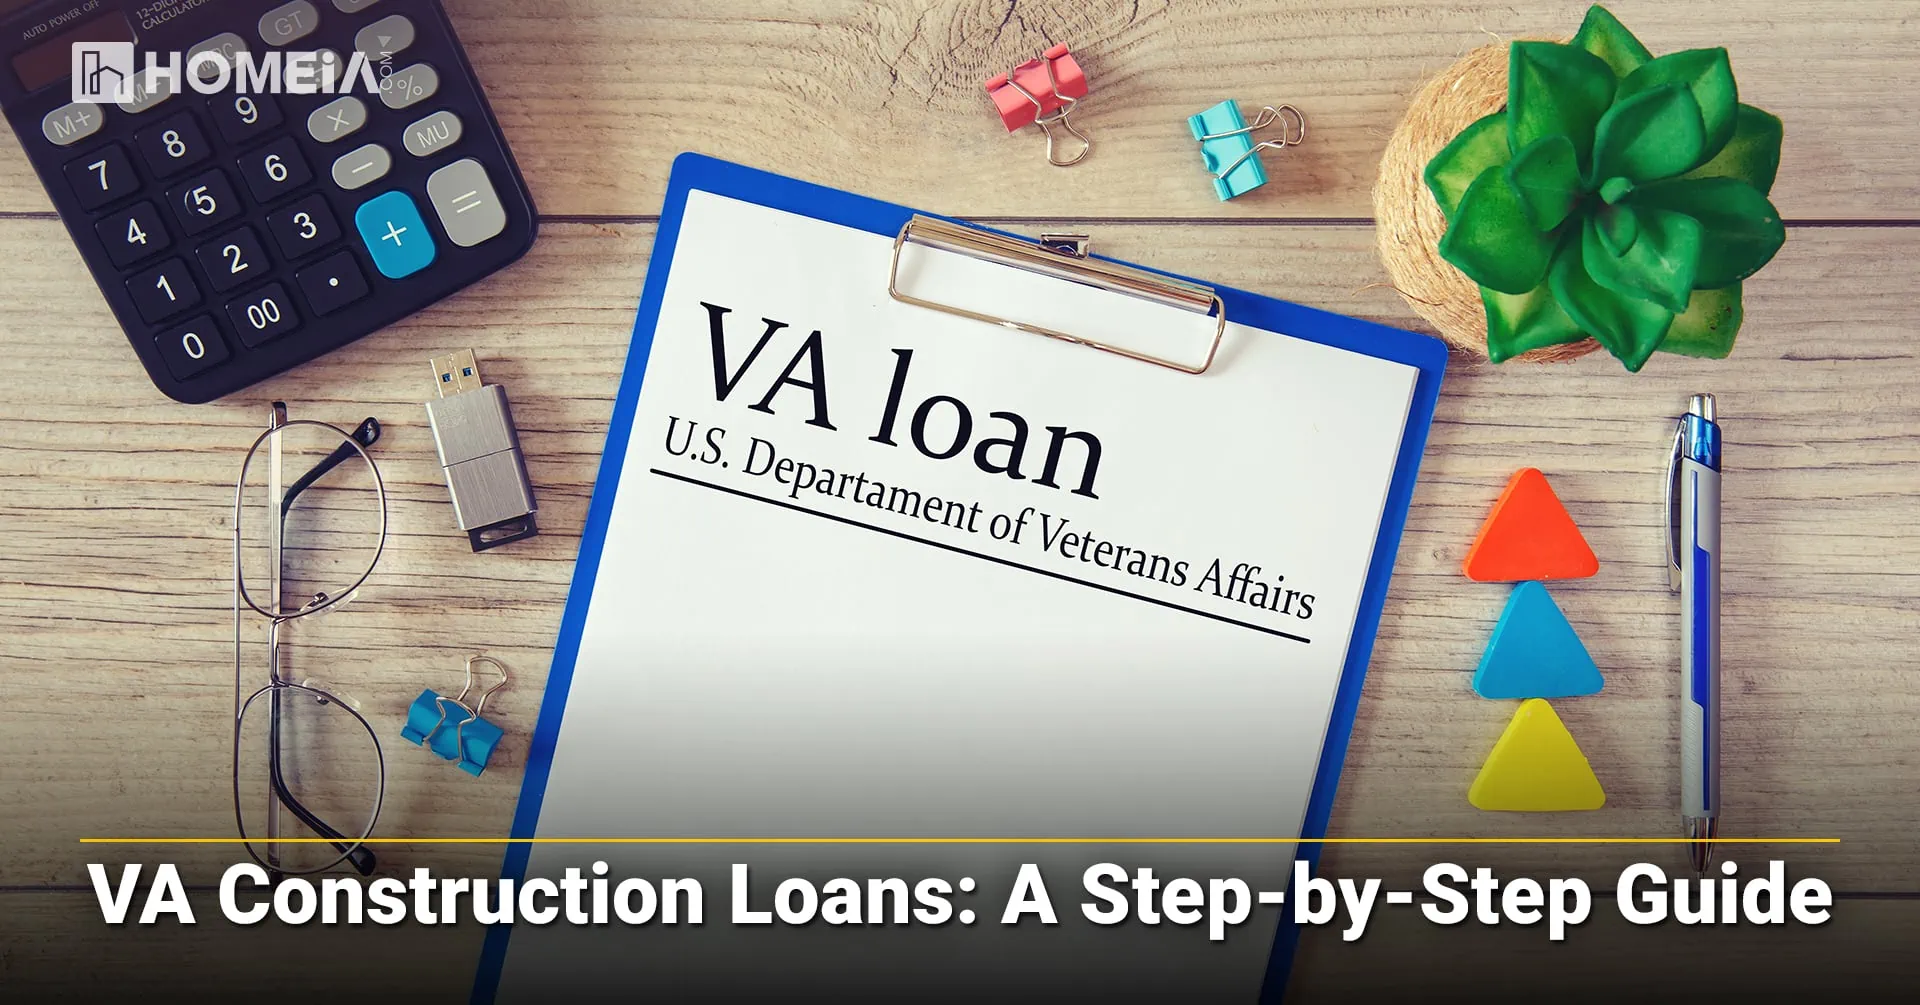 VA Construction Loans: A Step-by-Step Guide